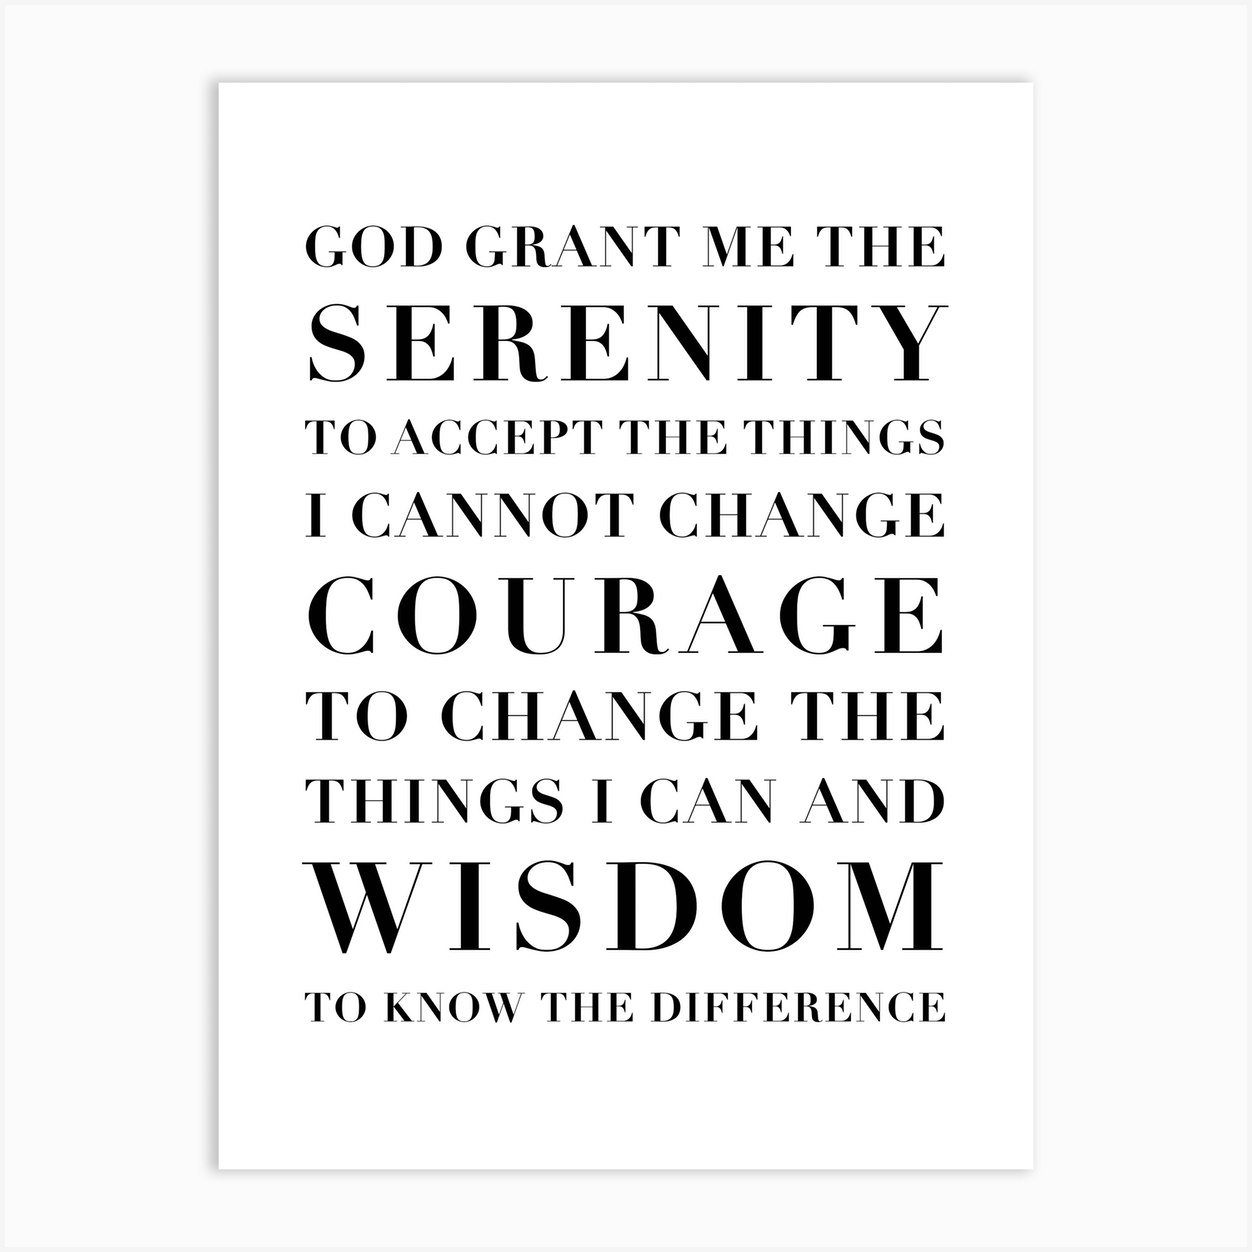 the-serenity-prayer-capitalized-art-print-by-typologie-paper-co-fy